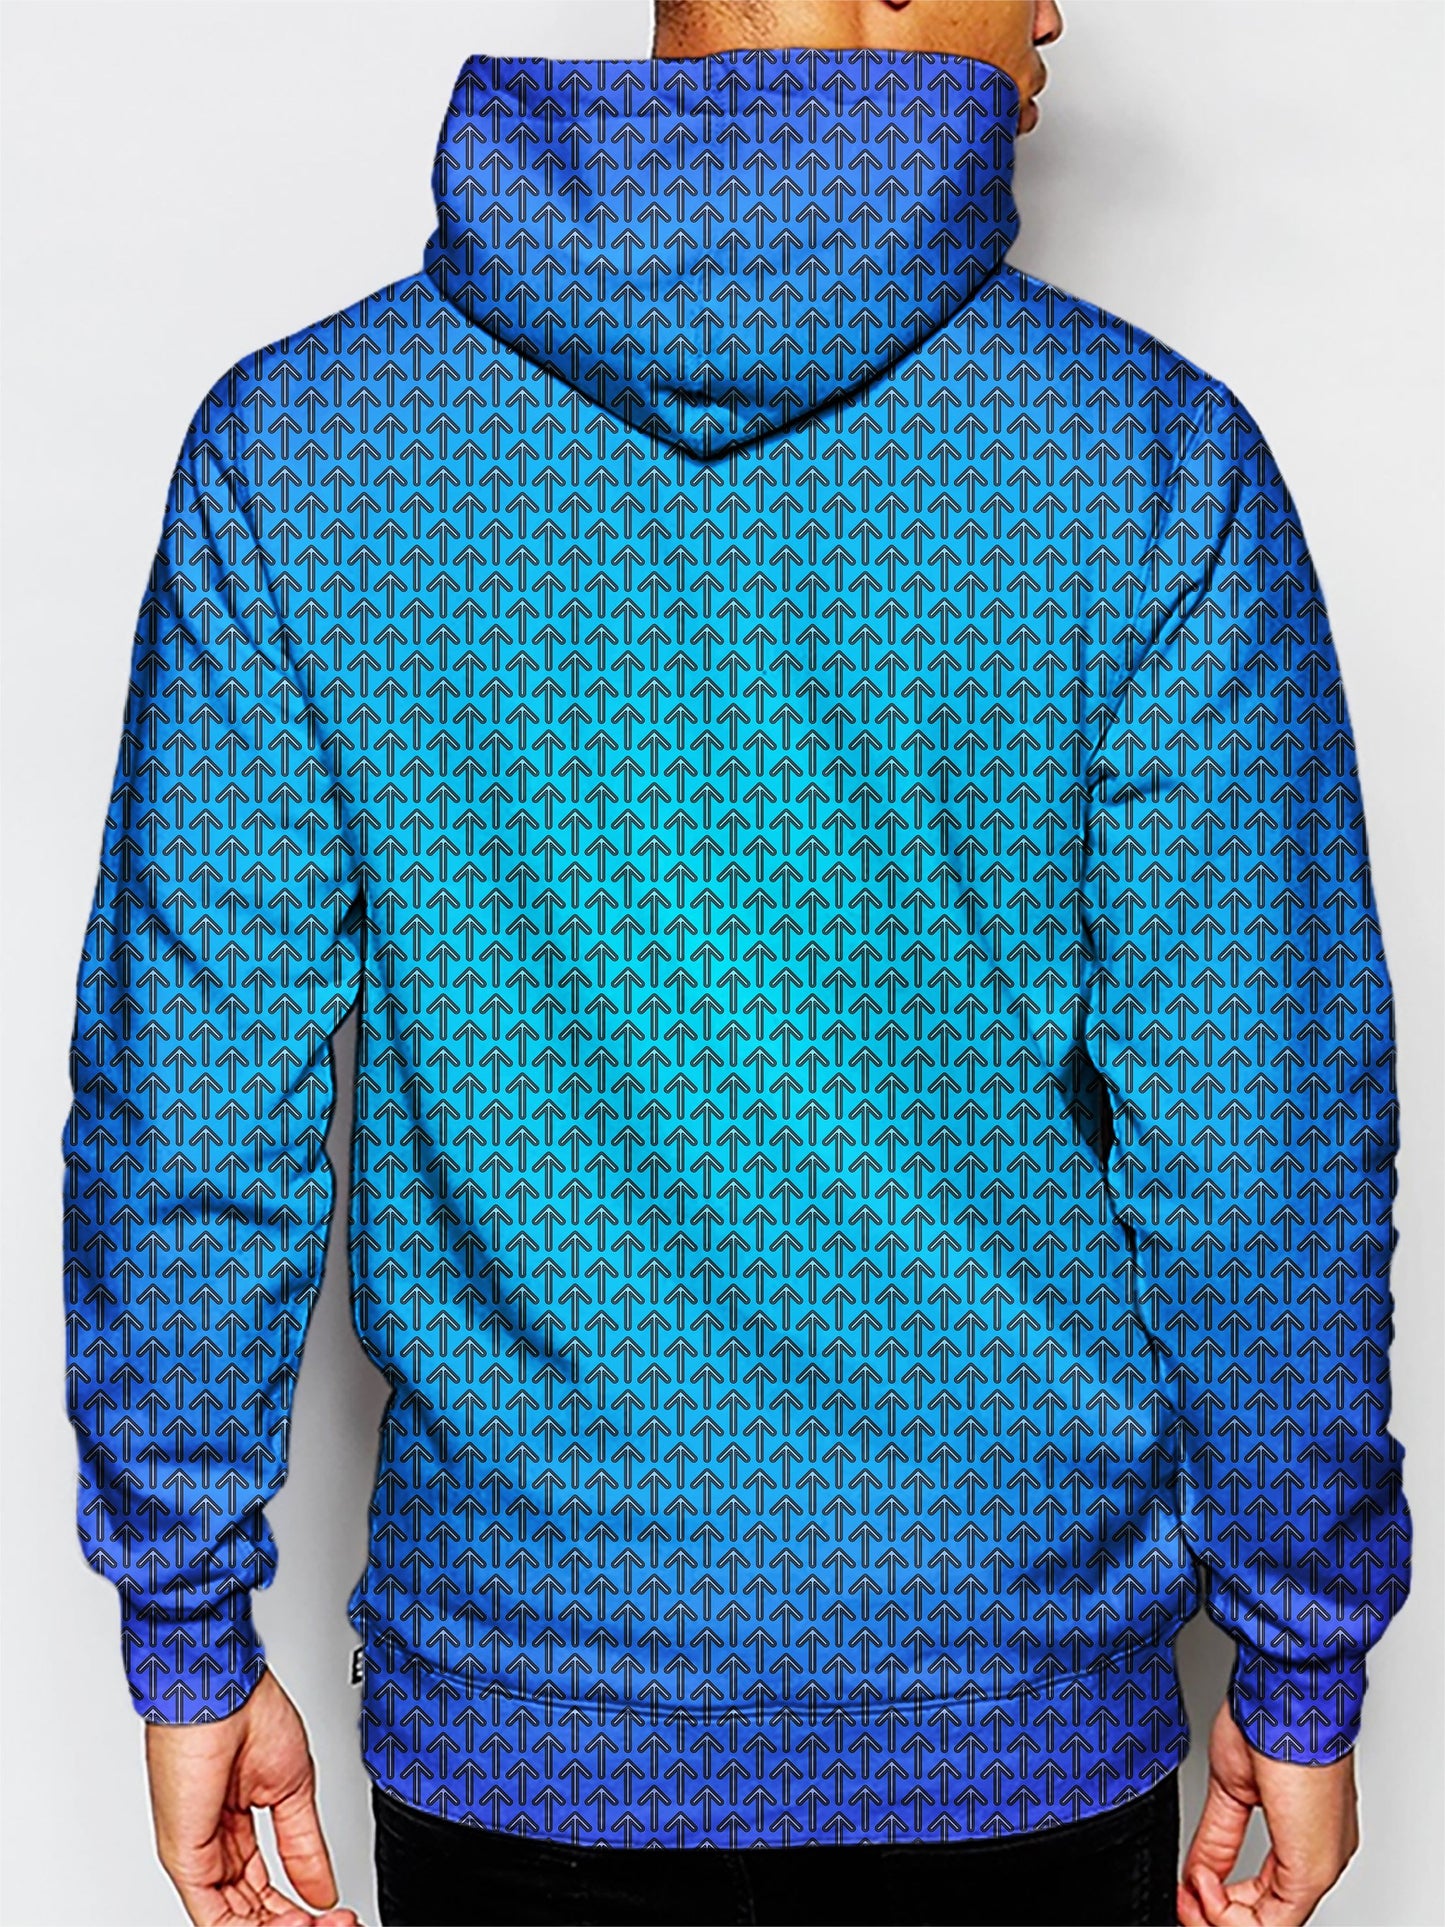 psychedelic hoodie with ble and green fade pattern graphicu